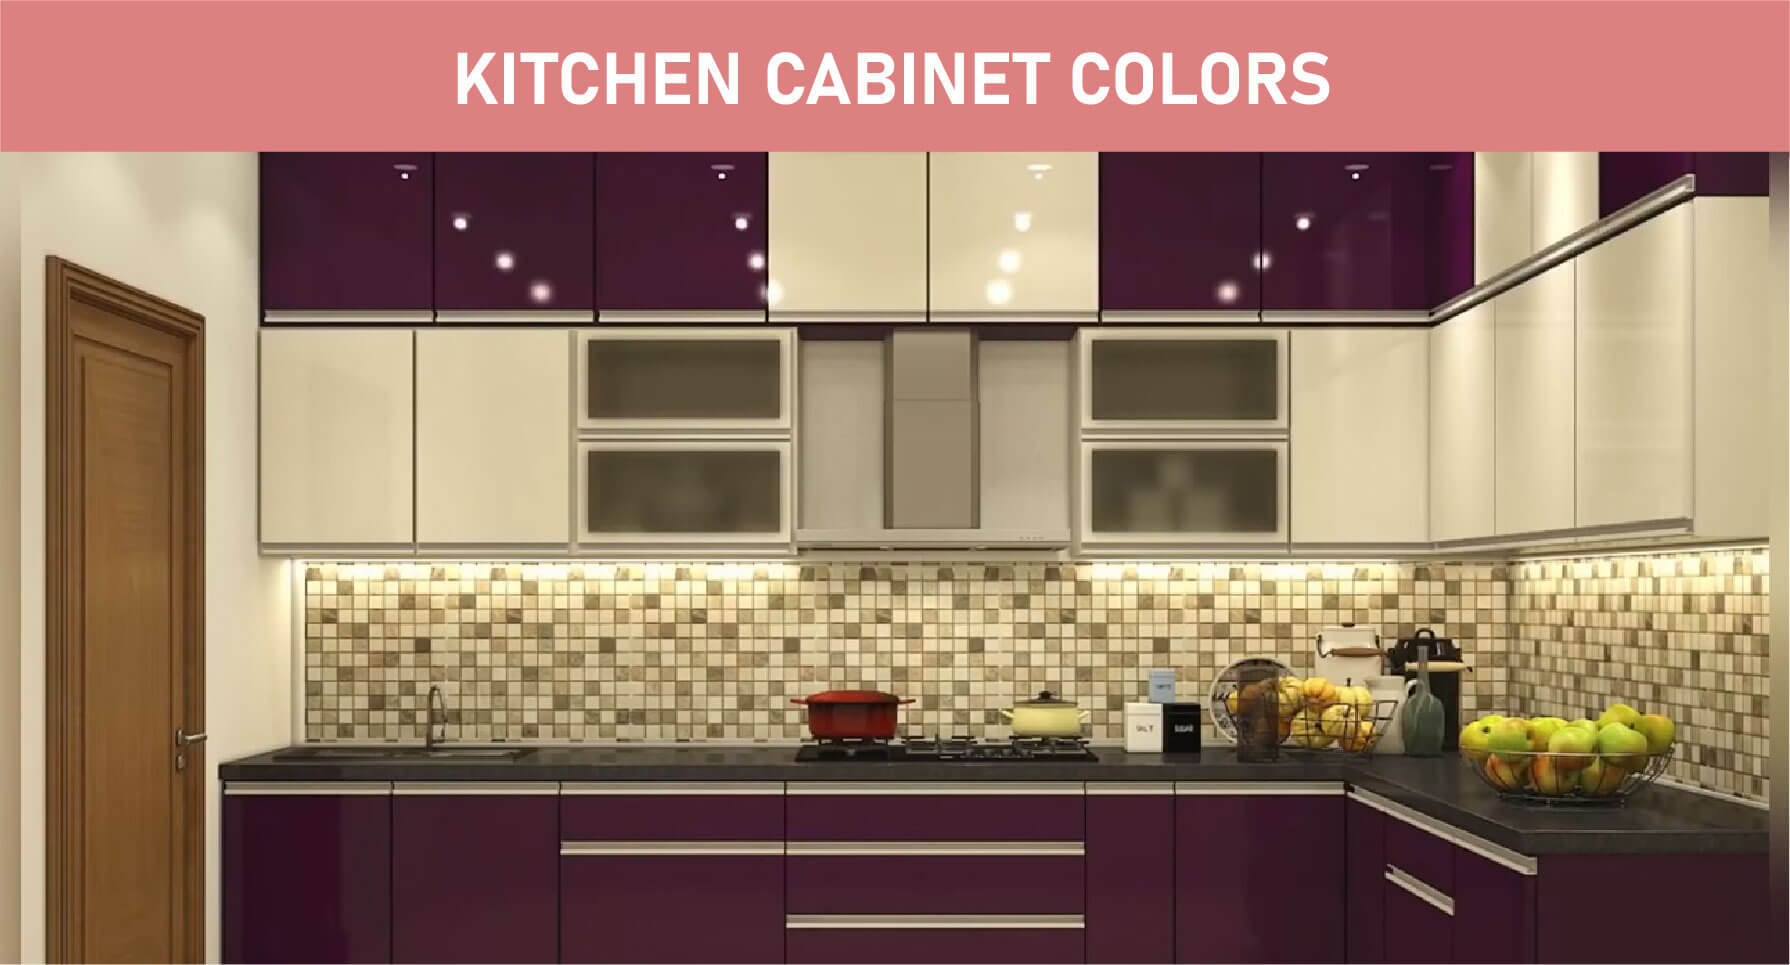 Kitchen Cabinet colors Featured image